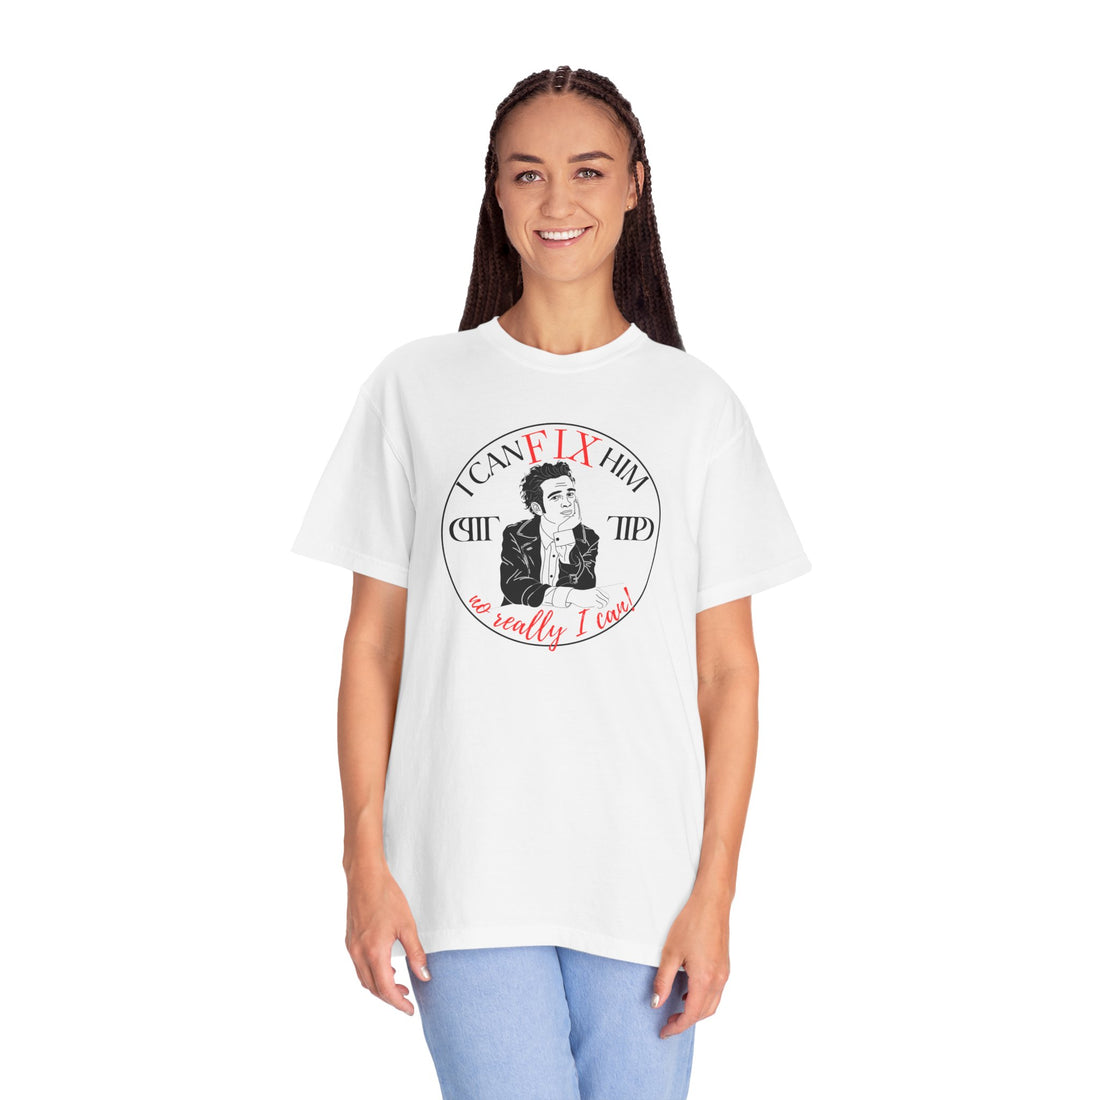 I Can Fix Him Taylor Swift Matty Healy TTPD  Graphic Tee